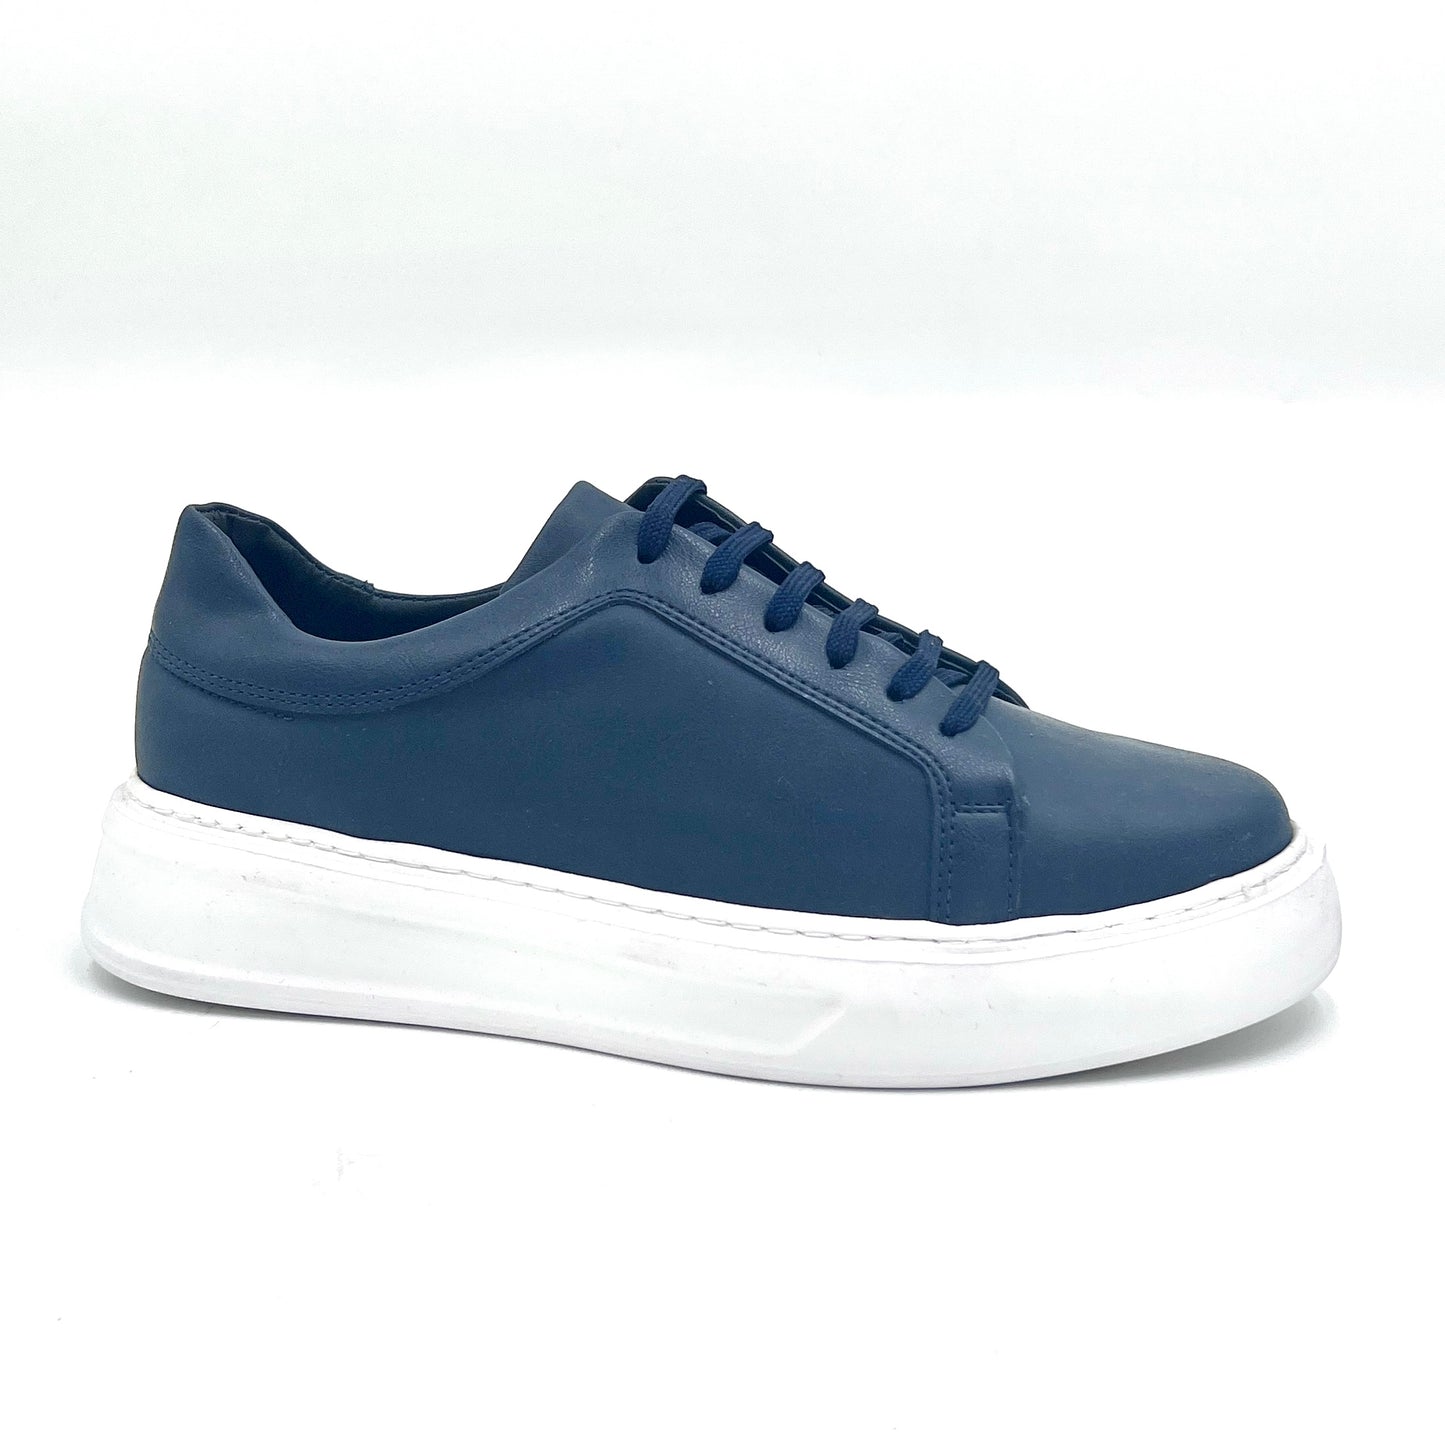 2H #9500 Navy Casual Shoes